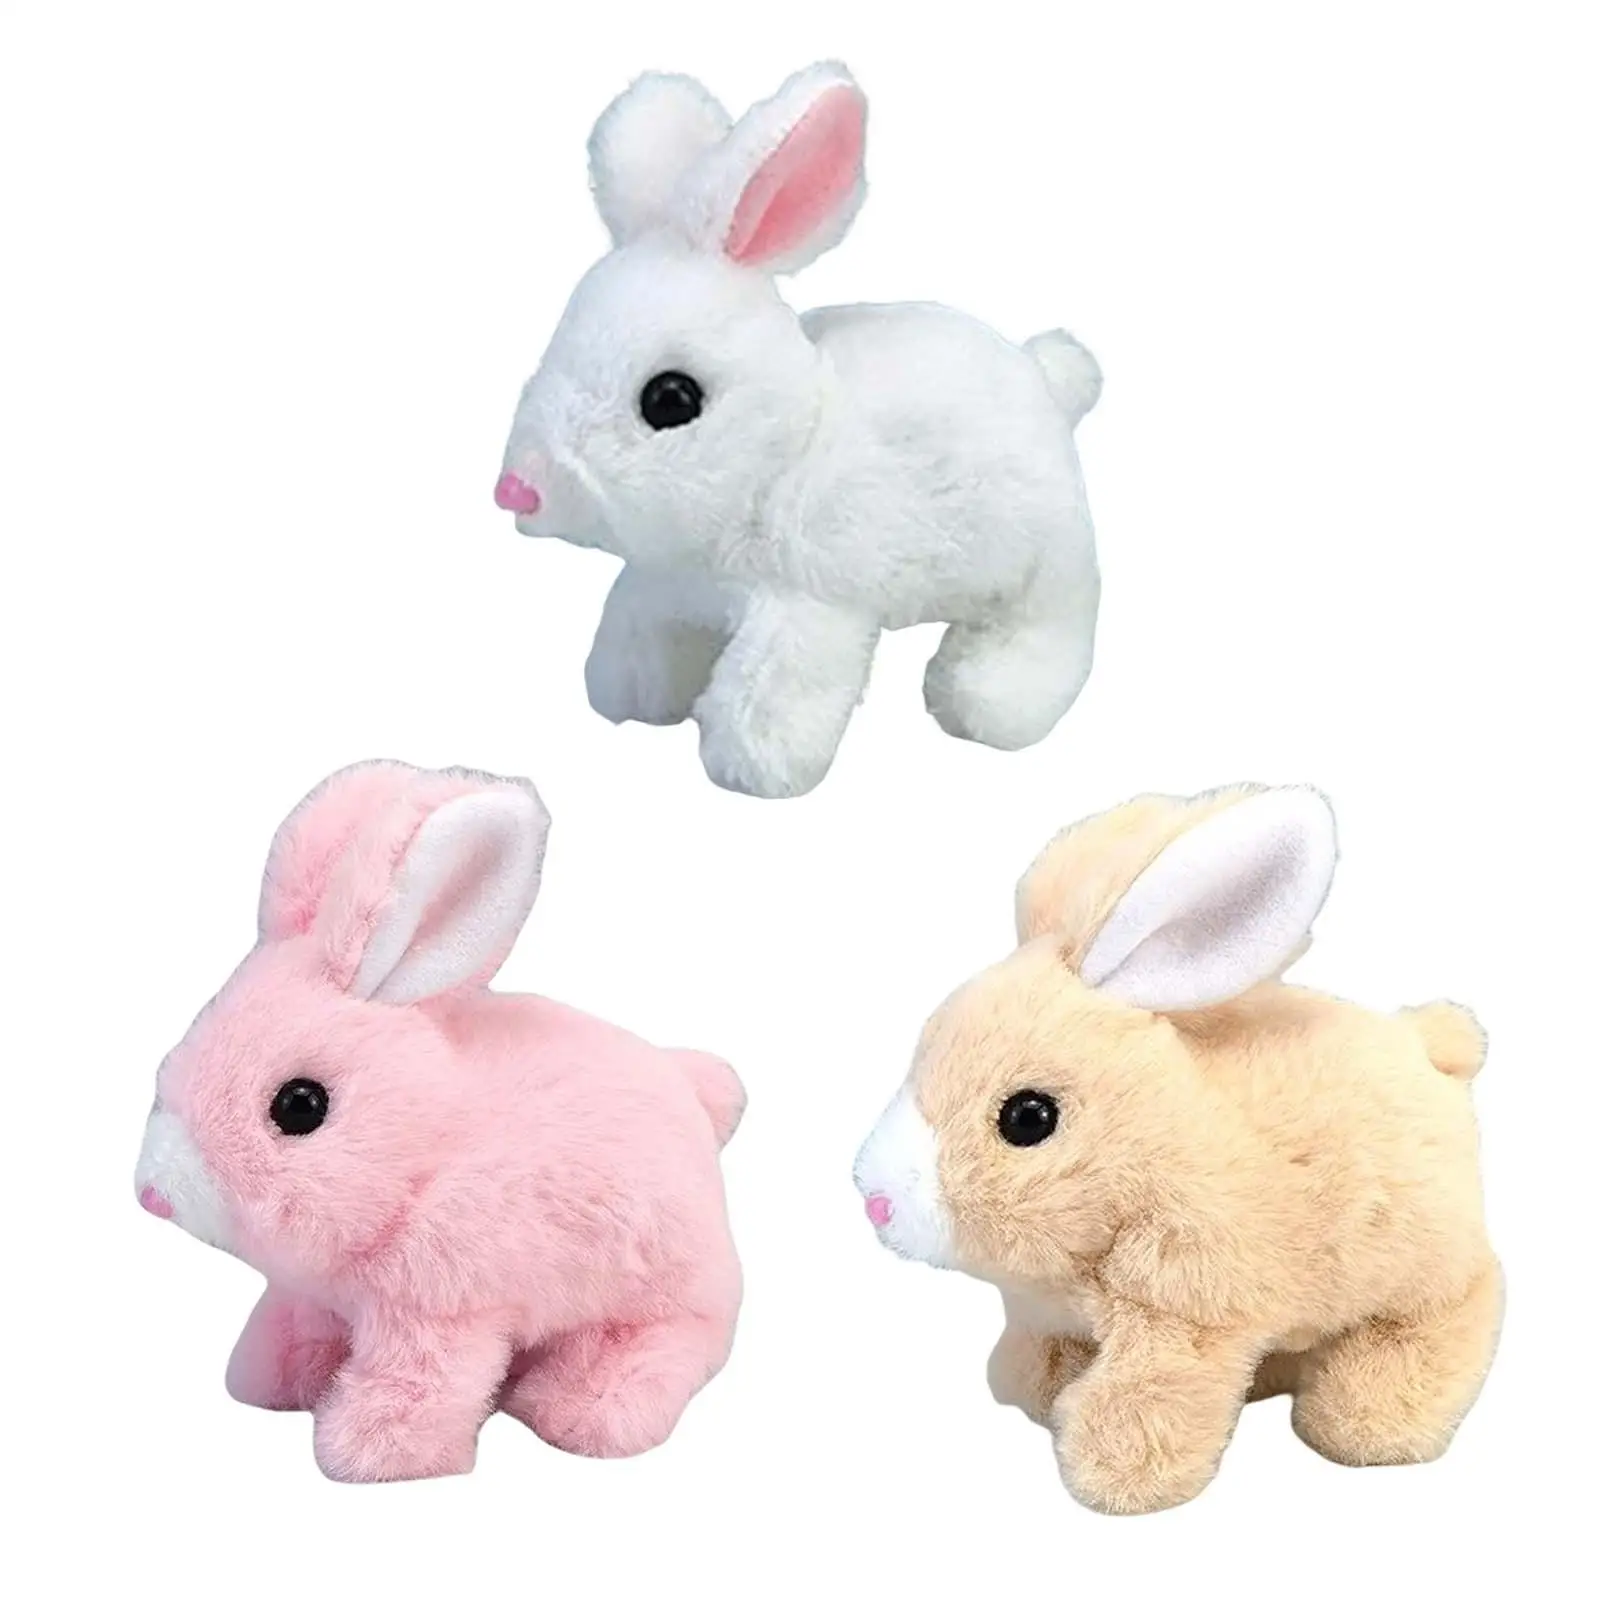 Electronic Rabbit Interactive Plush Toy Wiggling Ears Early Education Toy Novelty with Sound for Bedtime Friend Kids Toy